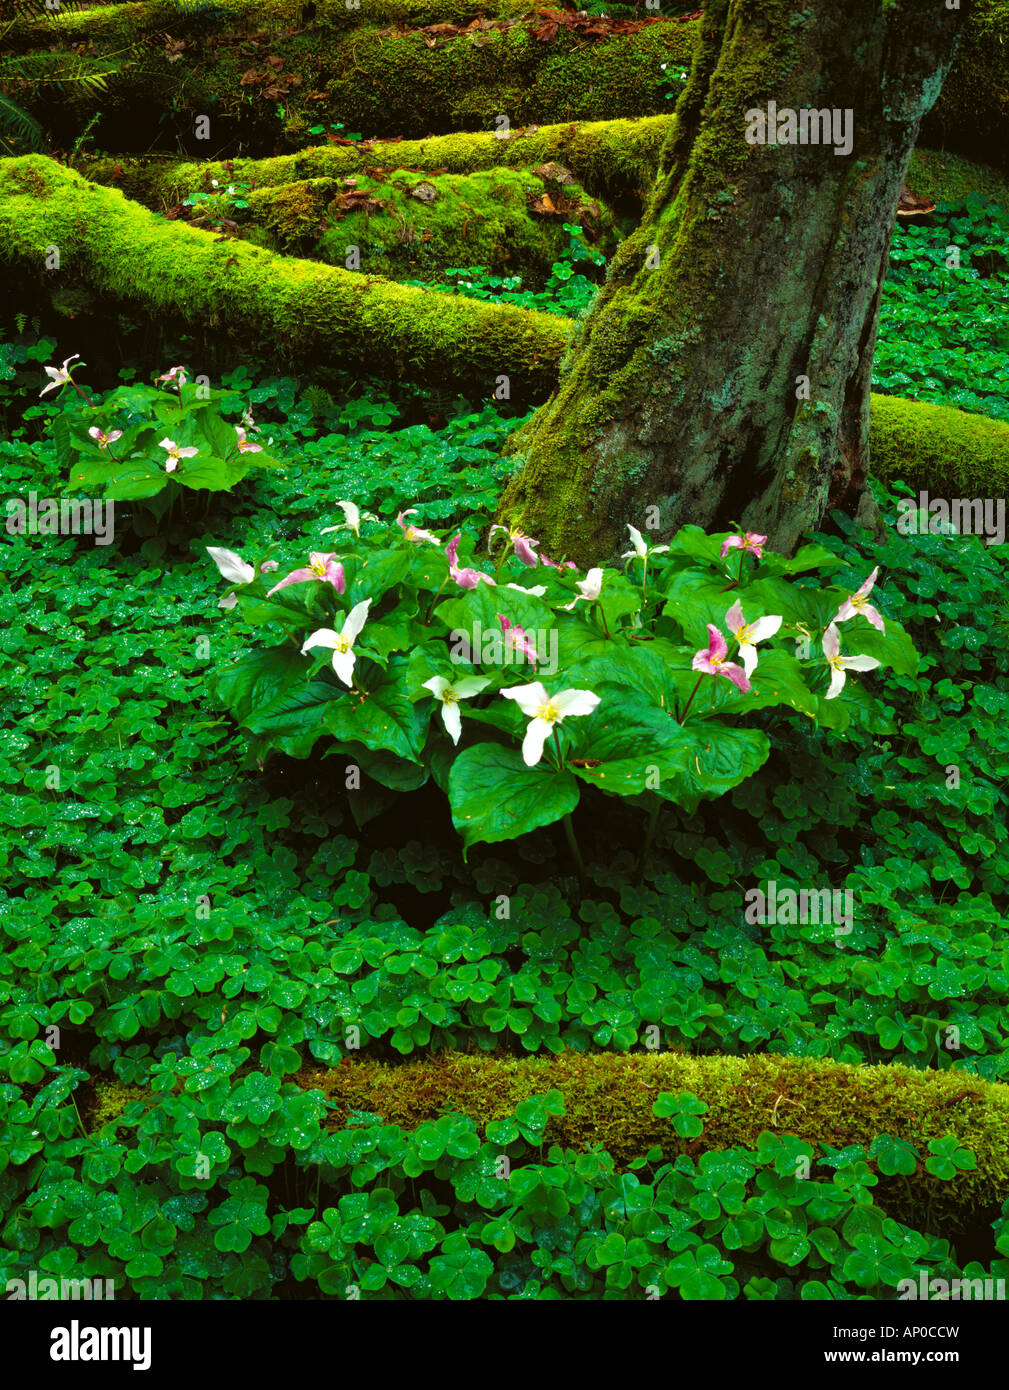 Ground cover of redwood sorrel with flowering trillium and mossy log on forest floor in Green Valley Creek on Vashon Island WA Stock Photo